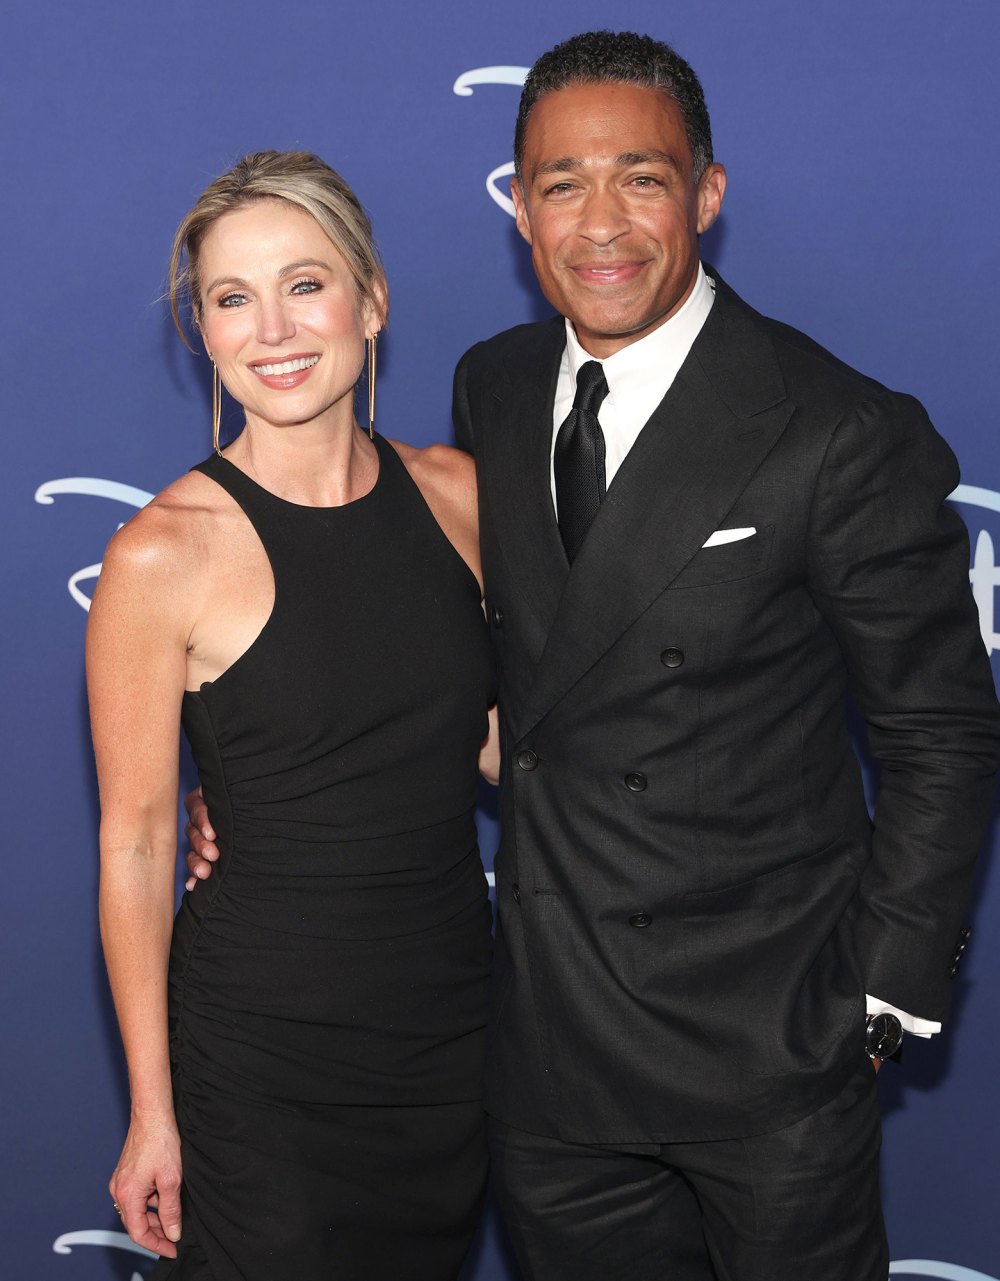 Elisabeth Shue Reveals How Brother Andrew Shue Is Doing After Amy Robach Split 3